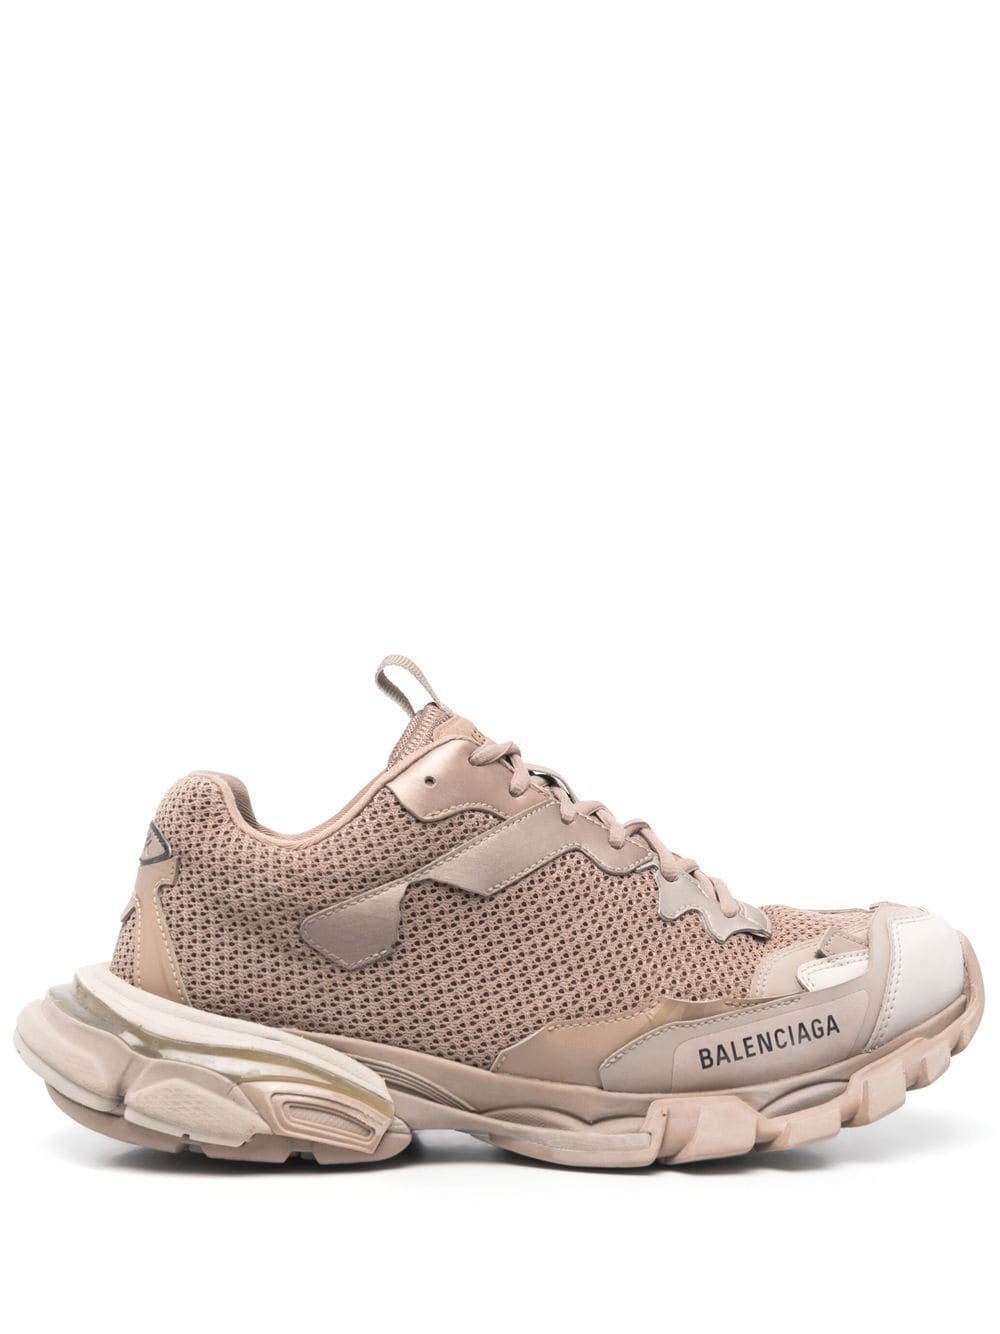 Balenciaga Destroyed Track sneakers - Neutrals